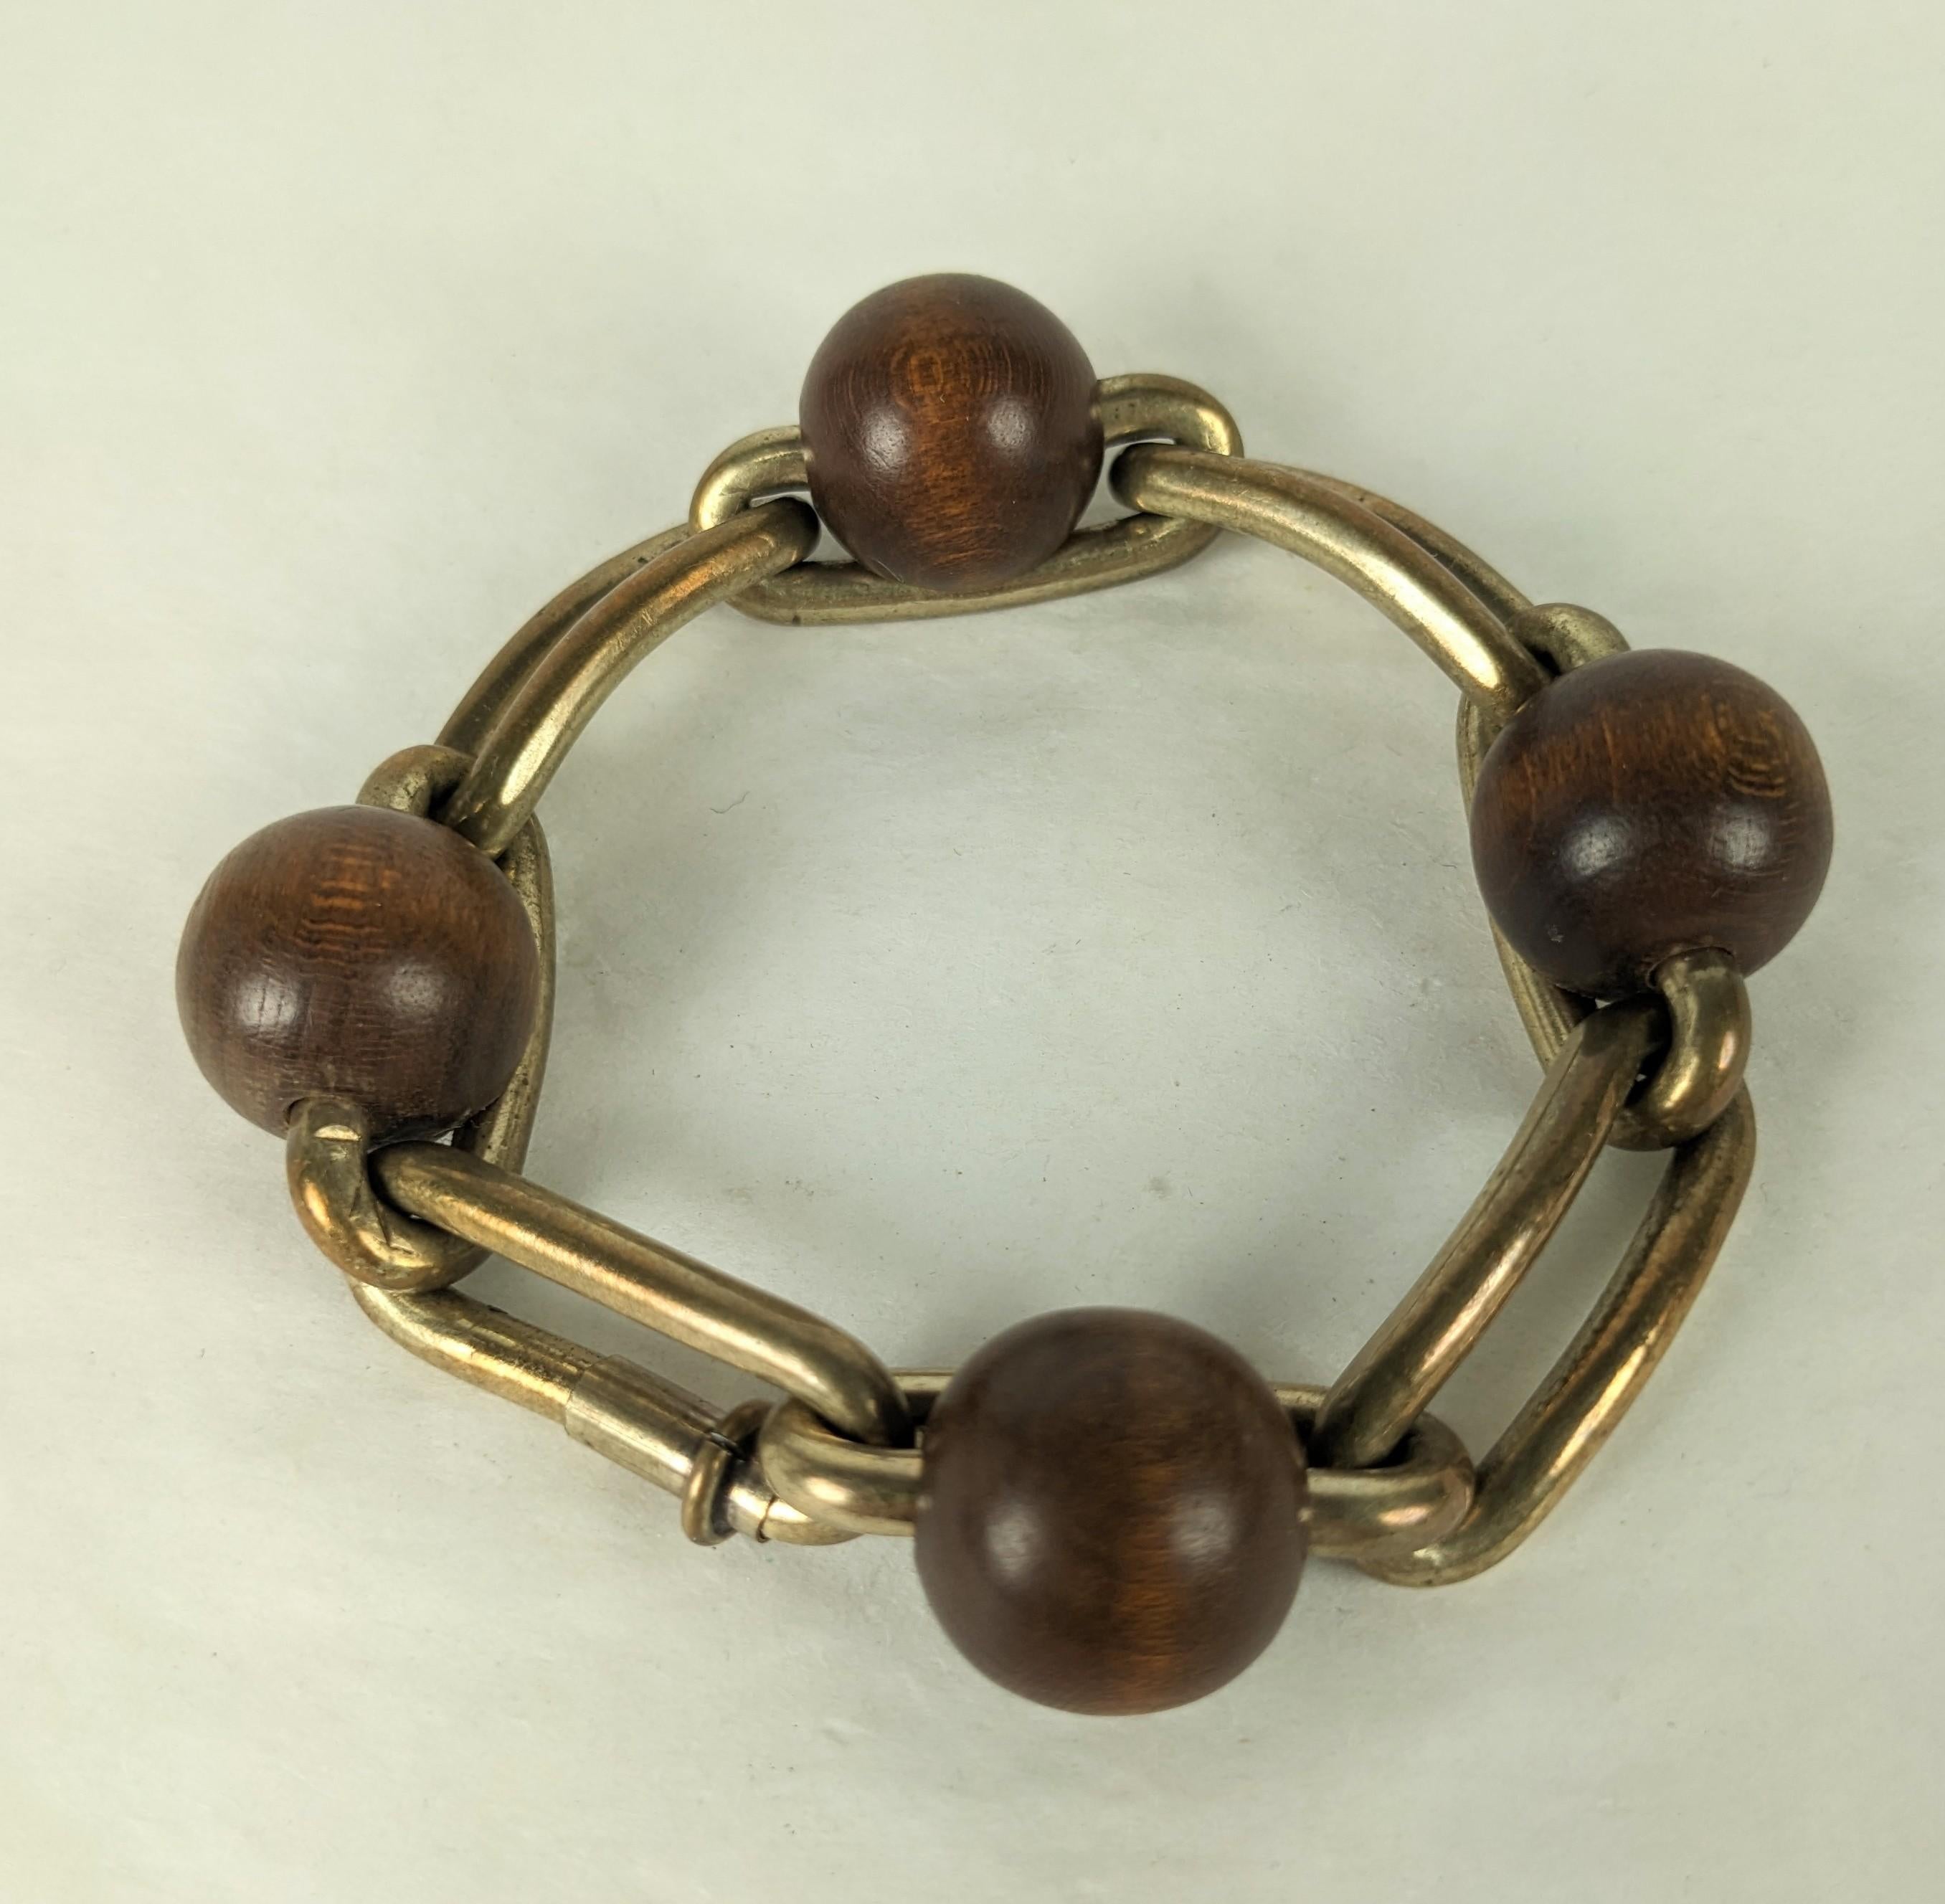 Hermes Style French Art Deco link bracelet circa 1930. Of large brass paper clip elongated machine age oval links, mounted with four exotic wood beads. Unique hidden link spring clasp. Good Condition, Fits Very Small size wrist. L 7.25 x W